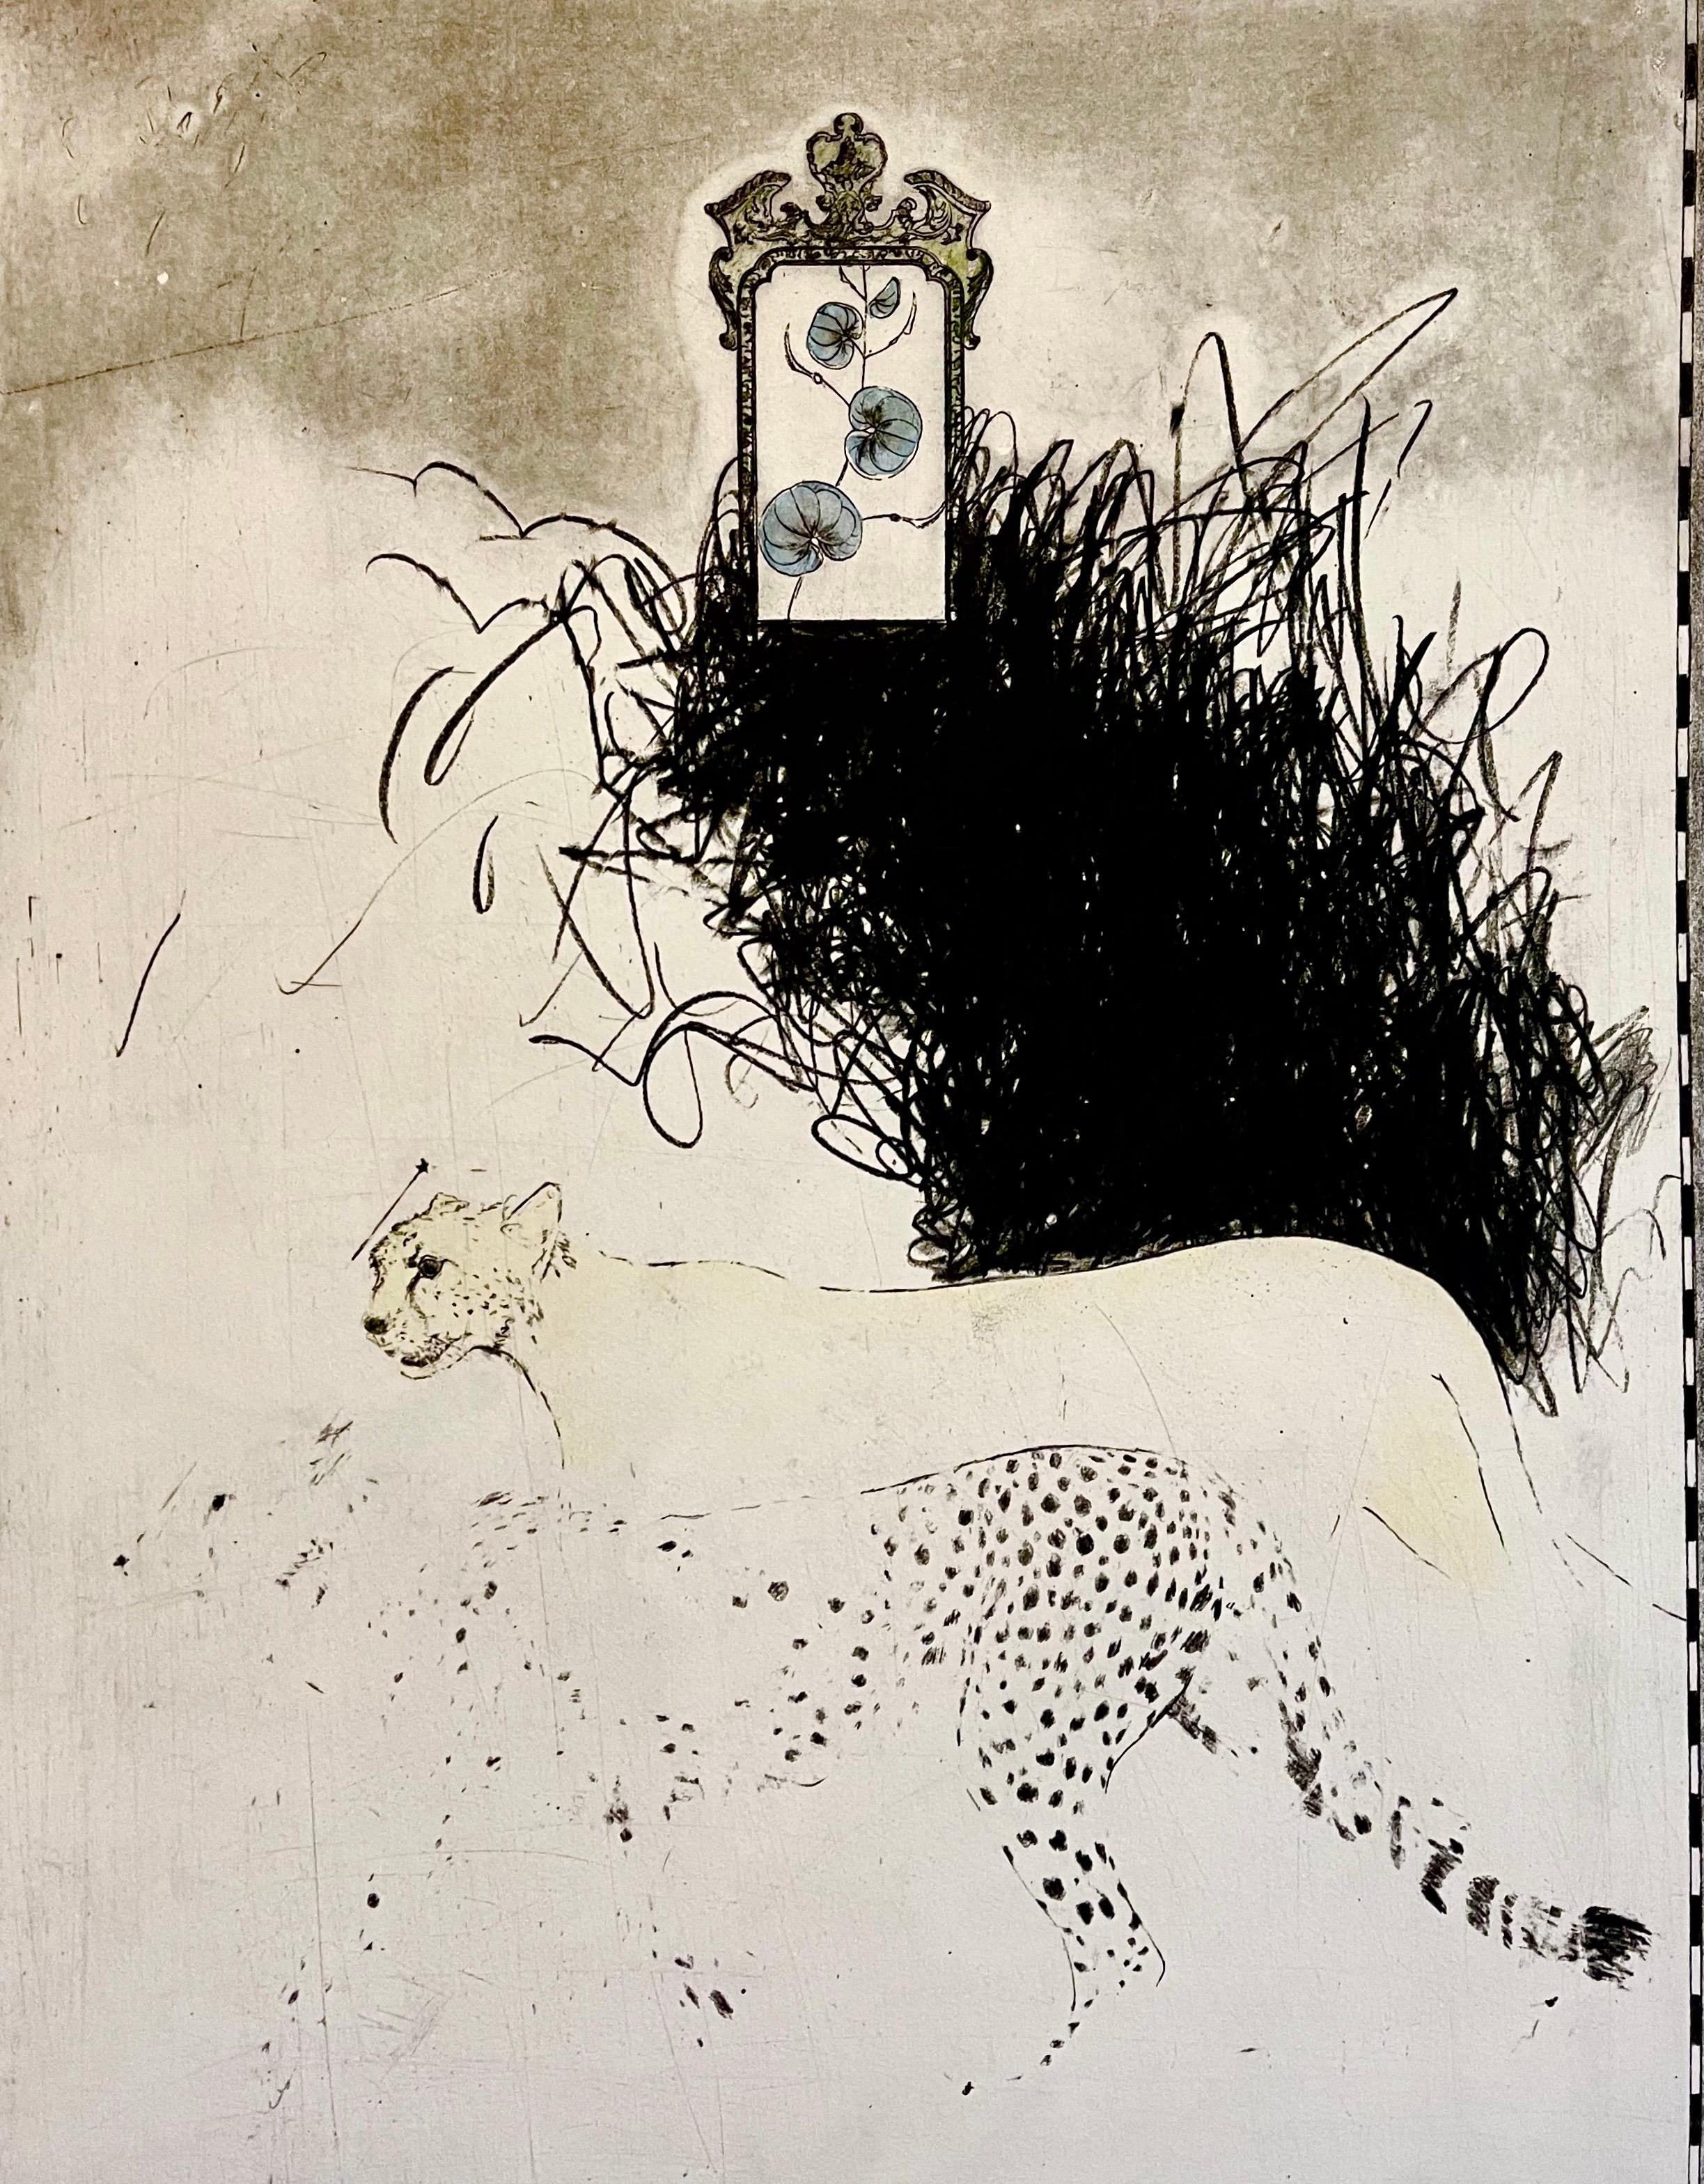 Artist: Donald Saff
Title: Leopard or Cheetah, big cats in interior
Year: 1980
Medium: Etching with Aquatint, Hand signed and numbered in pencil
Edition: 150 
30 in. x 22.5 in. (76.2 cm x 55.88 cm)

Donald Jay Saff (born 12 December 1937) is an